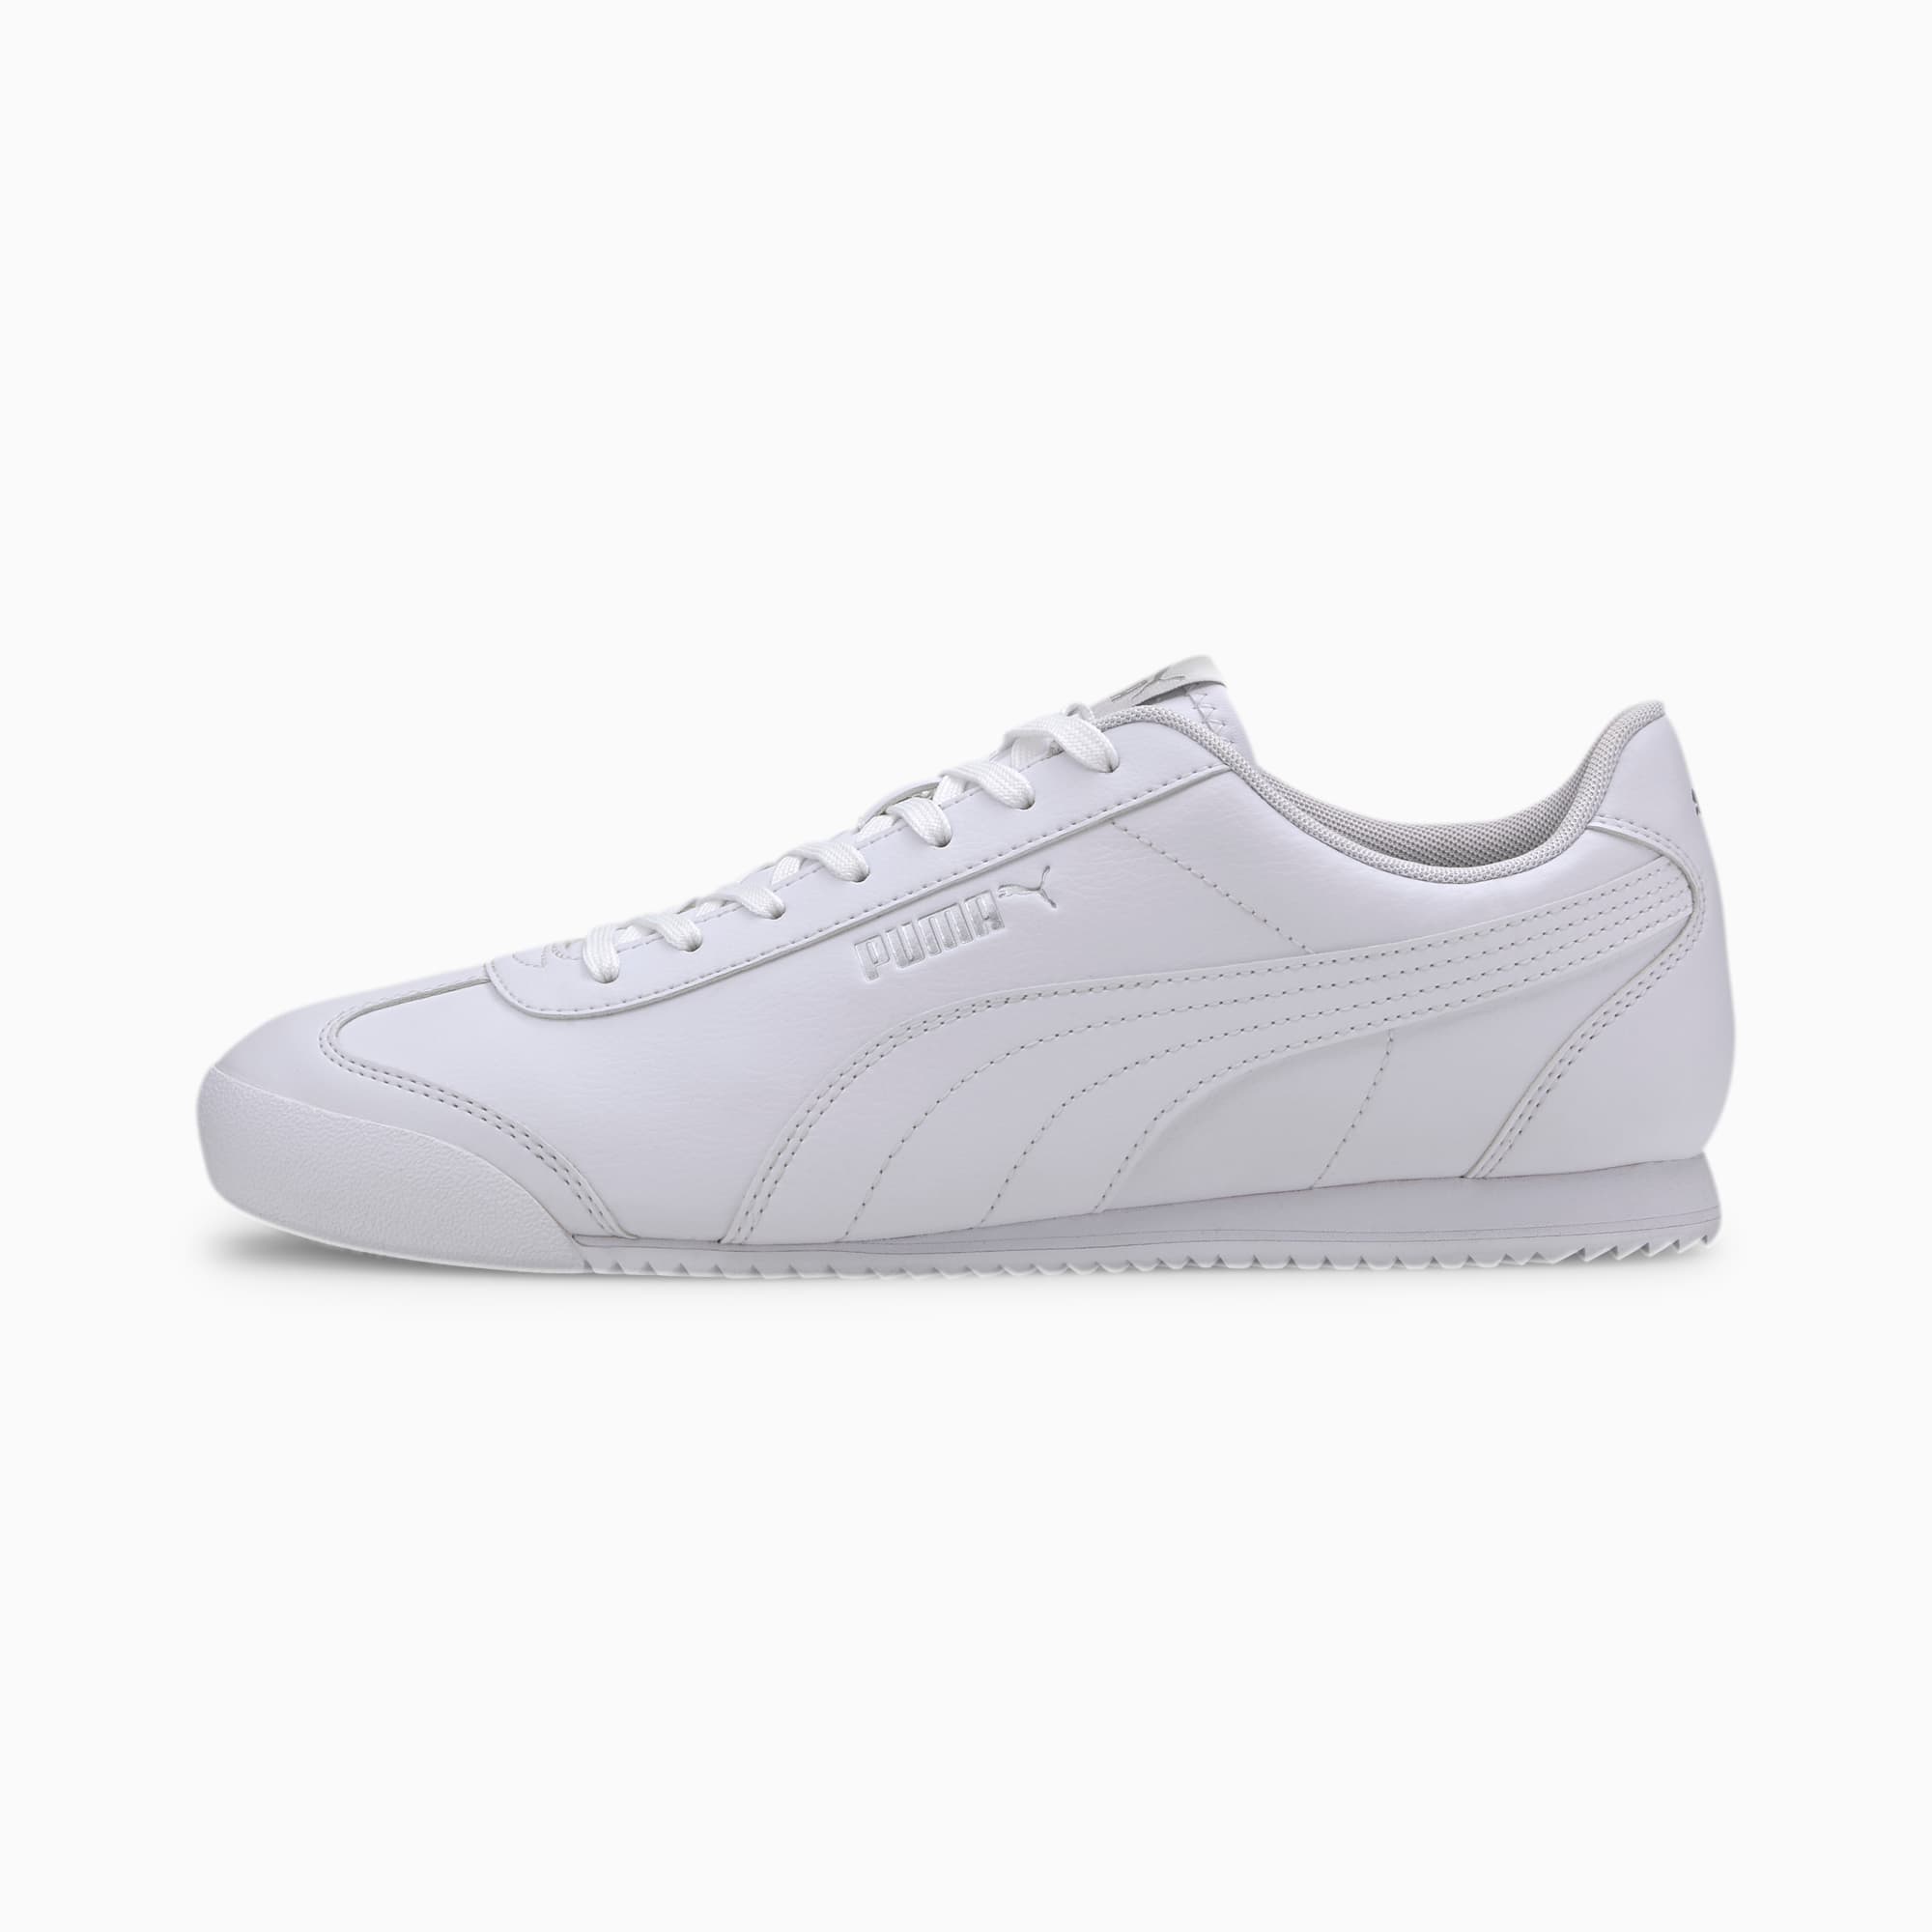 Puma Coupon: 30% Off Sale or Outlet Styles: Men's Turino SL Sneaker $17.49, Women's Adelina Ballet Shoe $21, More + FS on $75+